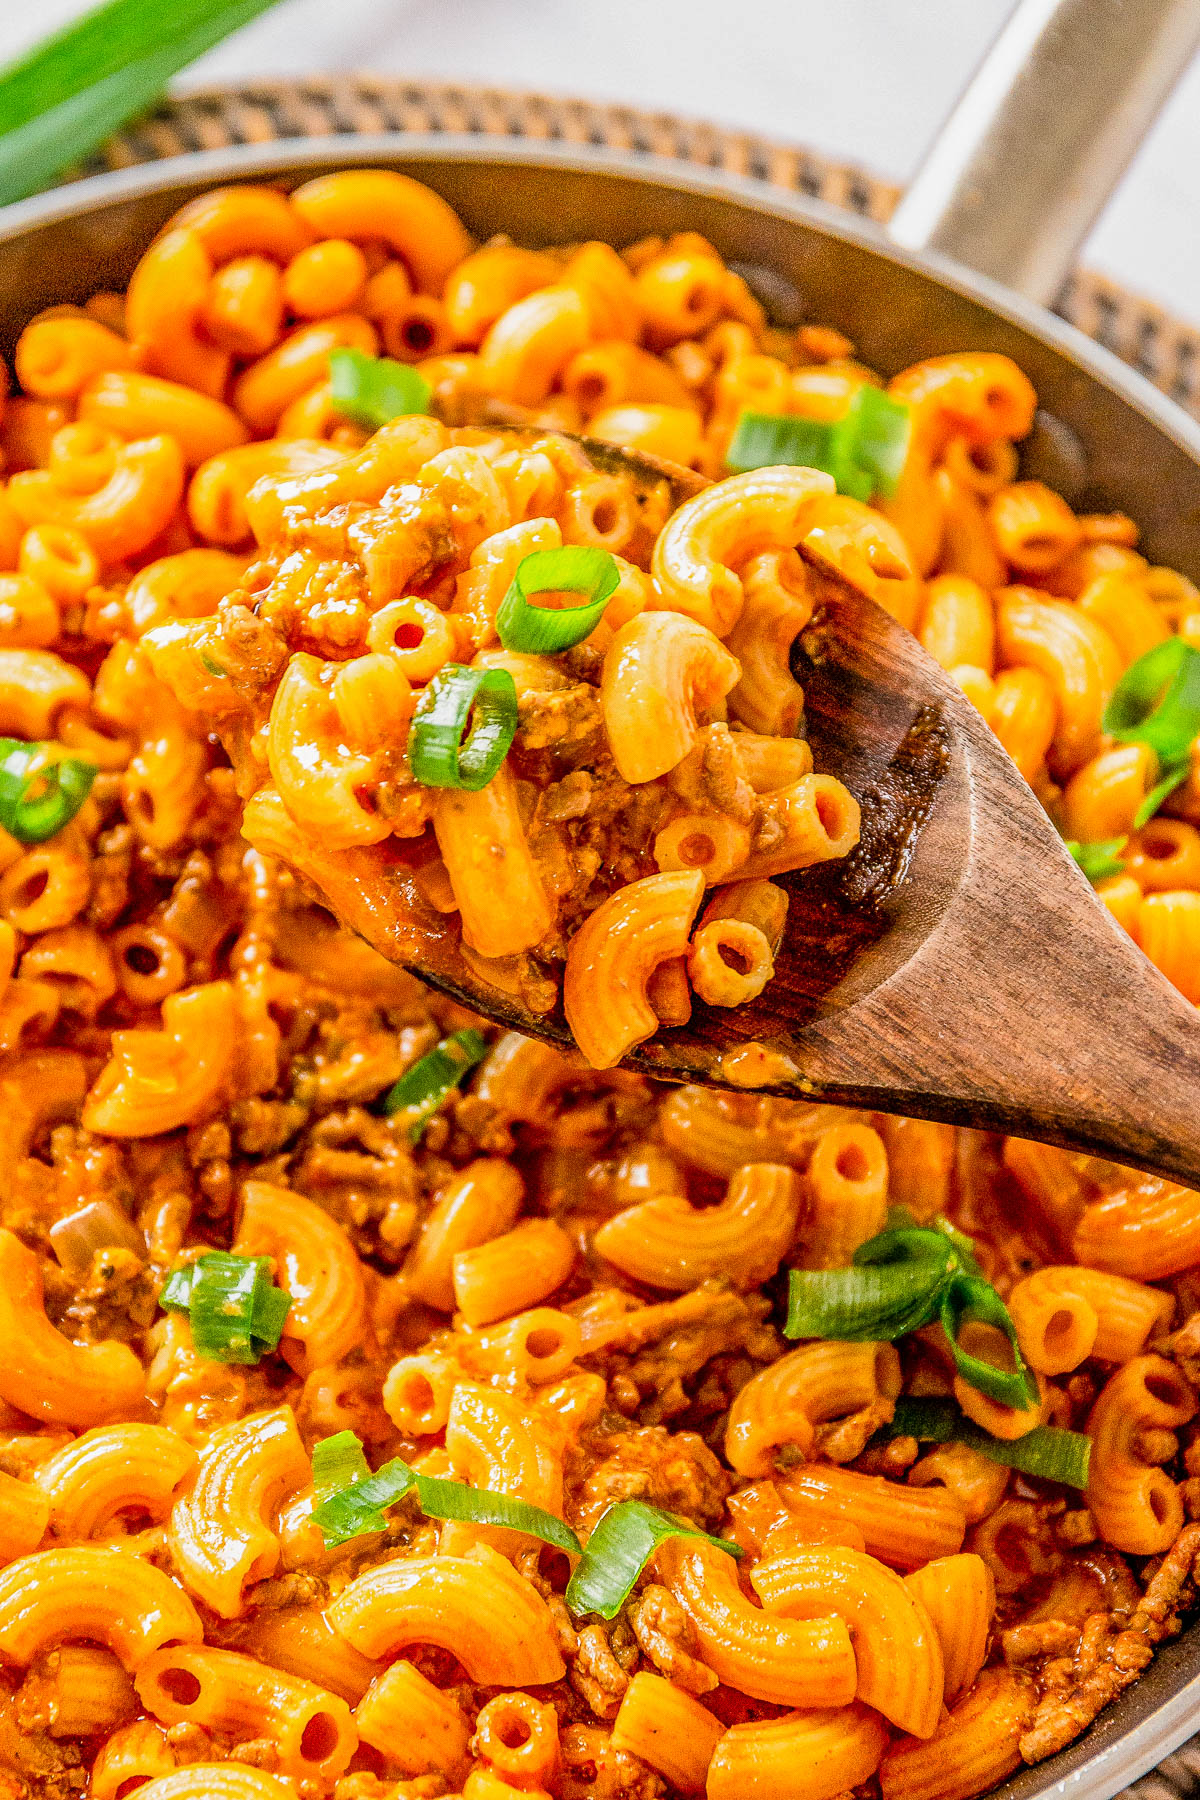 Homemade Hamburger Helper - You can kiss the store bought stuff goodbye because my homemade recipe for classic cheeseburger pasta is EASY, ready in 30 minutes, and made in ONE skillet! There's saucy cheesy pasta and juicy ground beef in every bite making this a family FAVORITE comfort food recipe. PERFECT for busy weeknights!